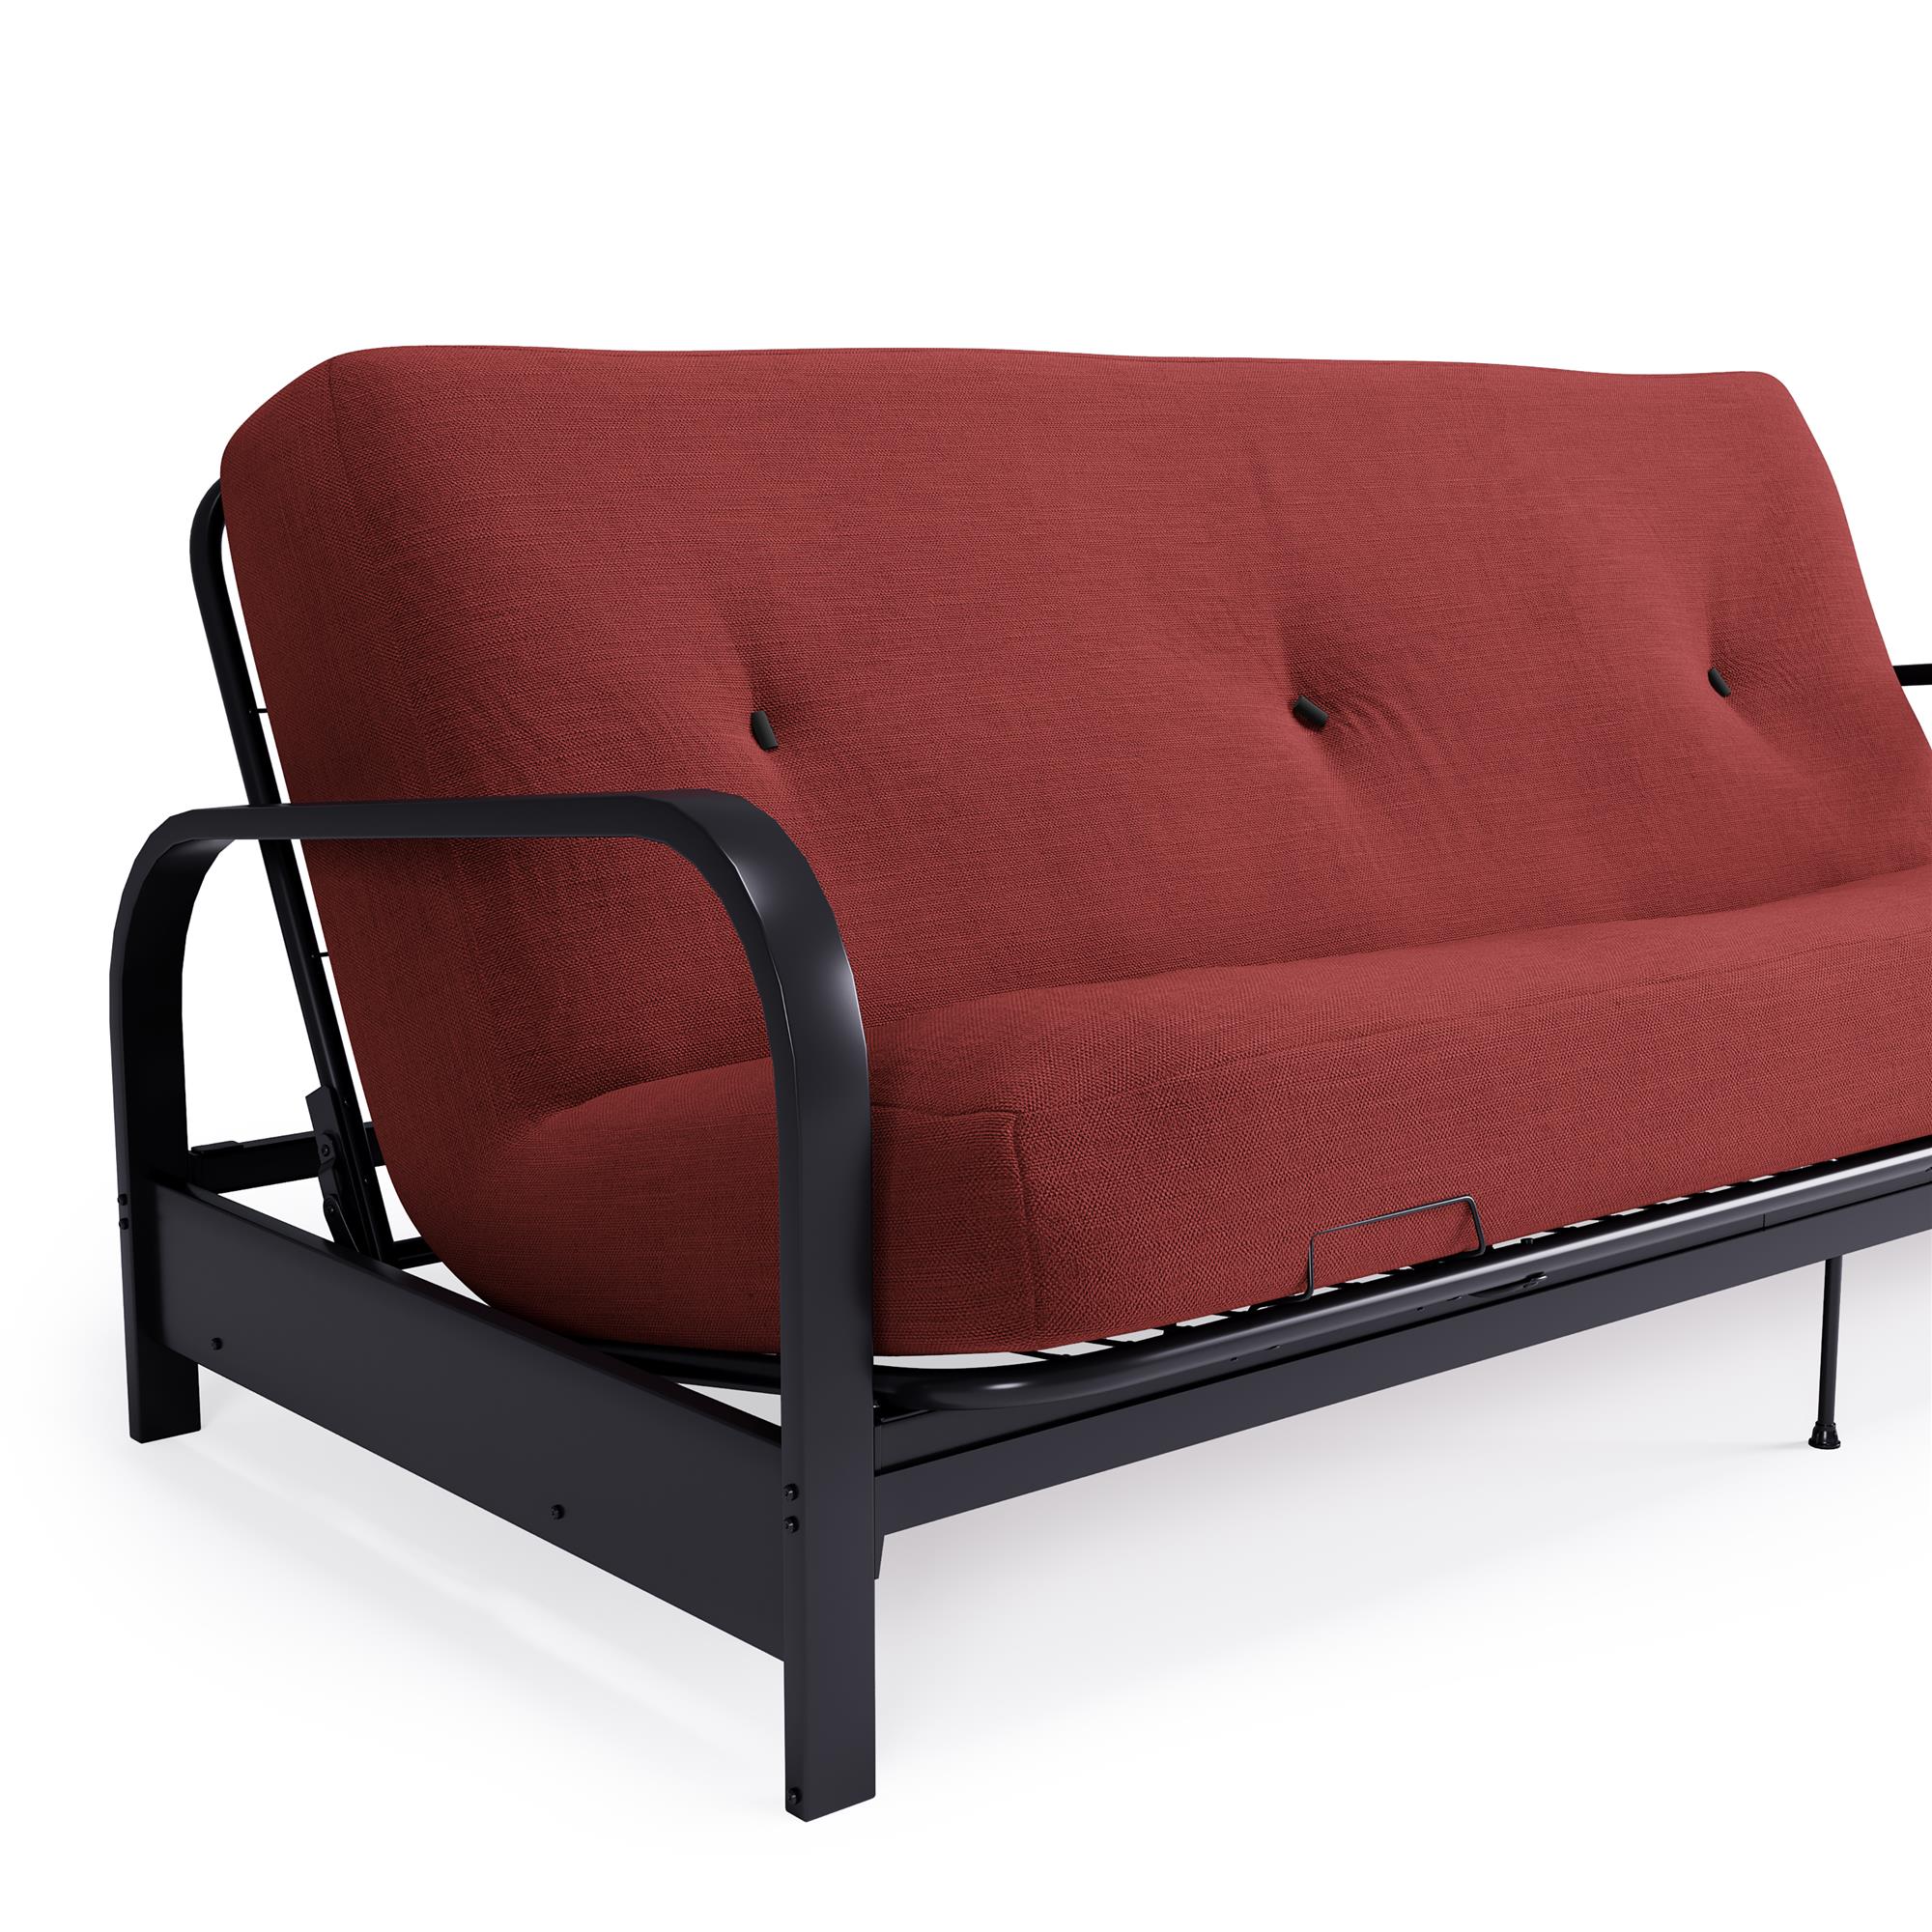 DHP Cleo Black Metal Arm Full Size Futon Frame with 6” Red Mattress - image 4 of 9